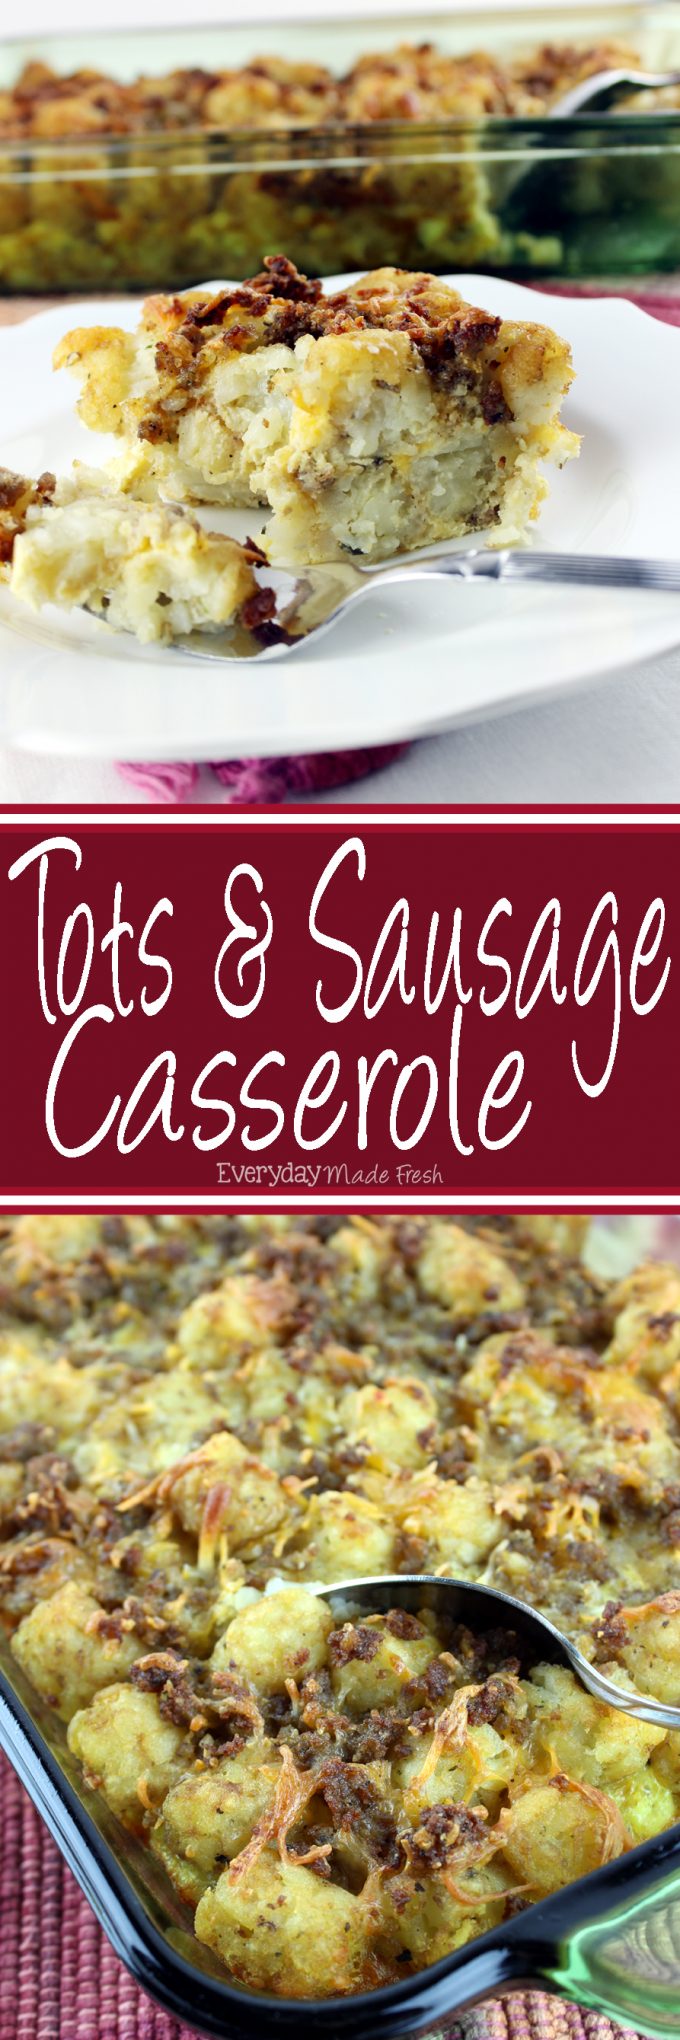 Breakfast is the most important meal of the day! Start off right with this tasty make ahead, or the day of, Tots and Sausage Casserole! Loaded with tater tots, ground sausage, eggs, and cheese, it's the perfect breakfast casserole. #BreakfastGoals2018 #ad | EverydayMadeFresh.com